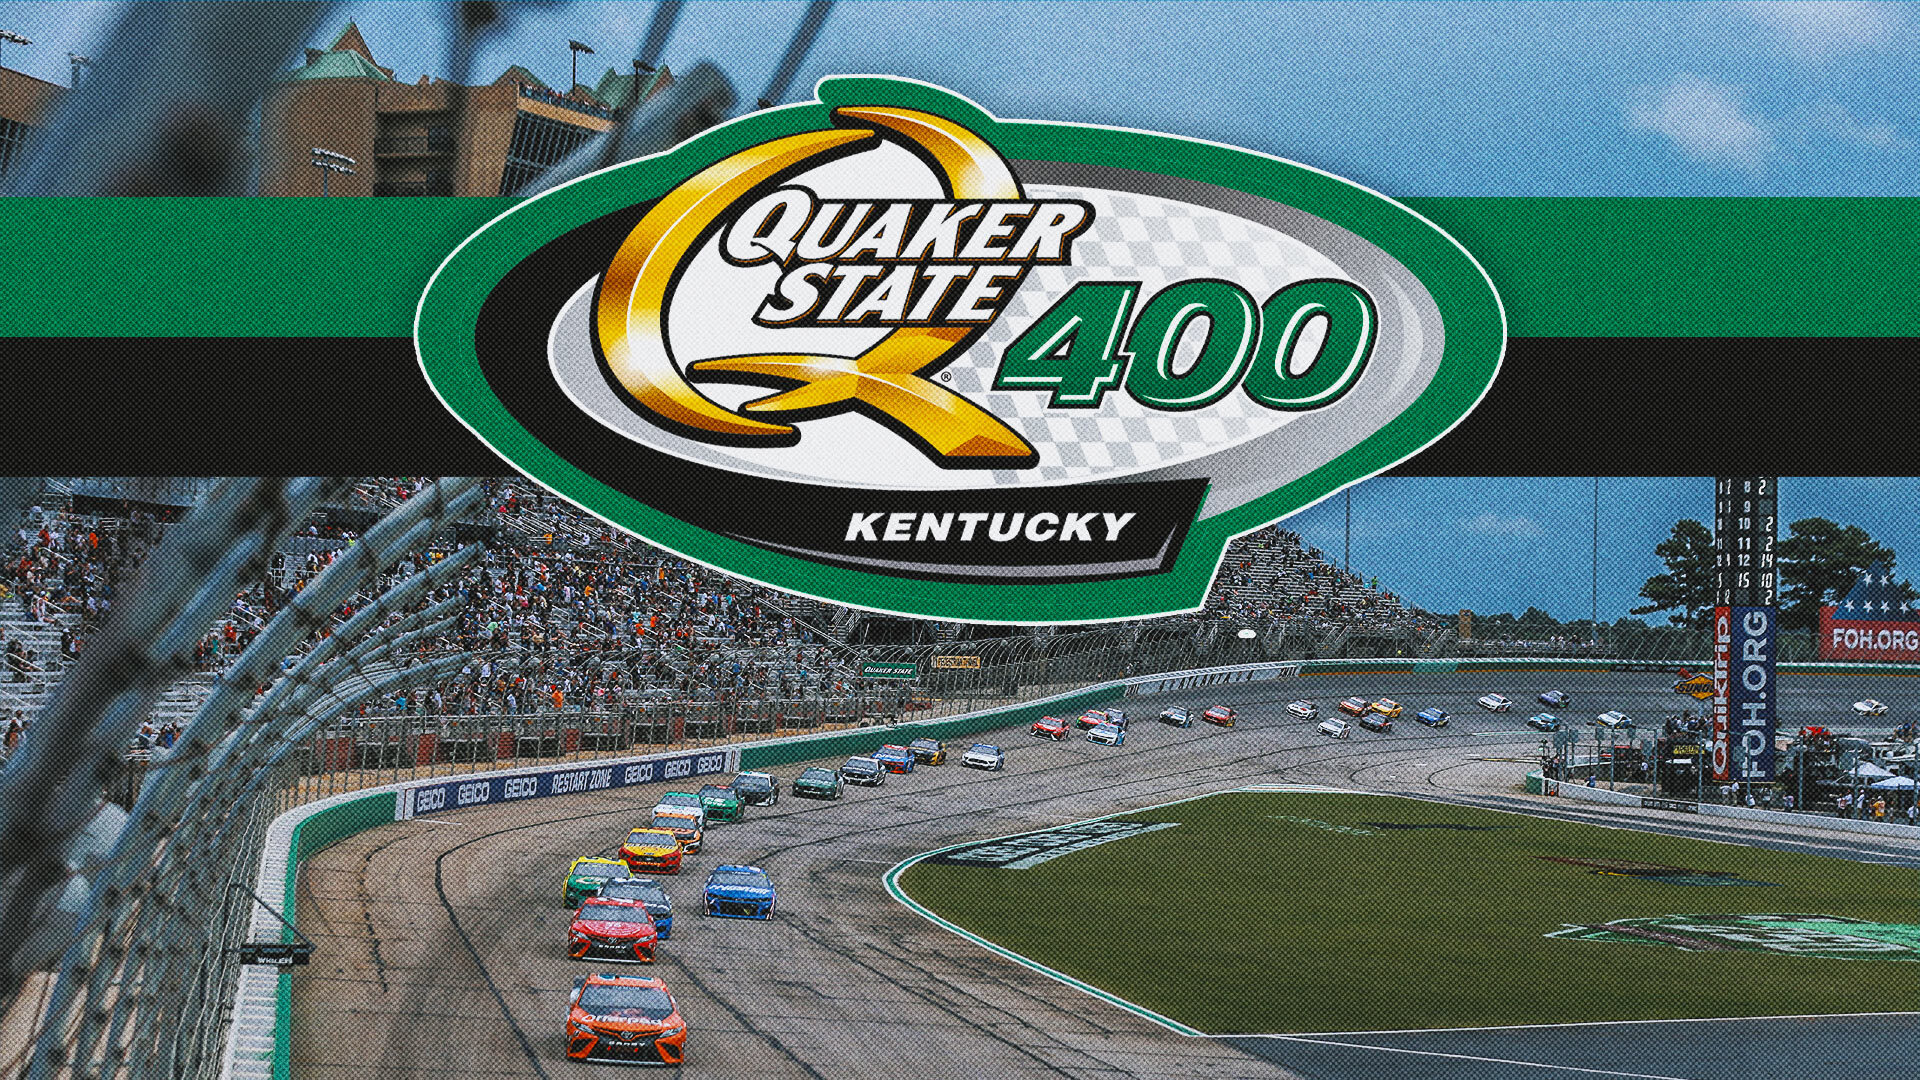 NASCAR Quaker State 400: Top moments from Atlanta Motor Speedway